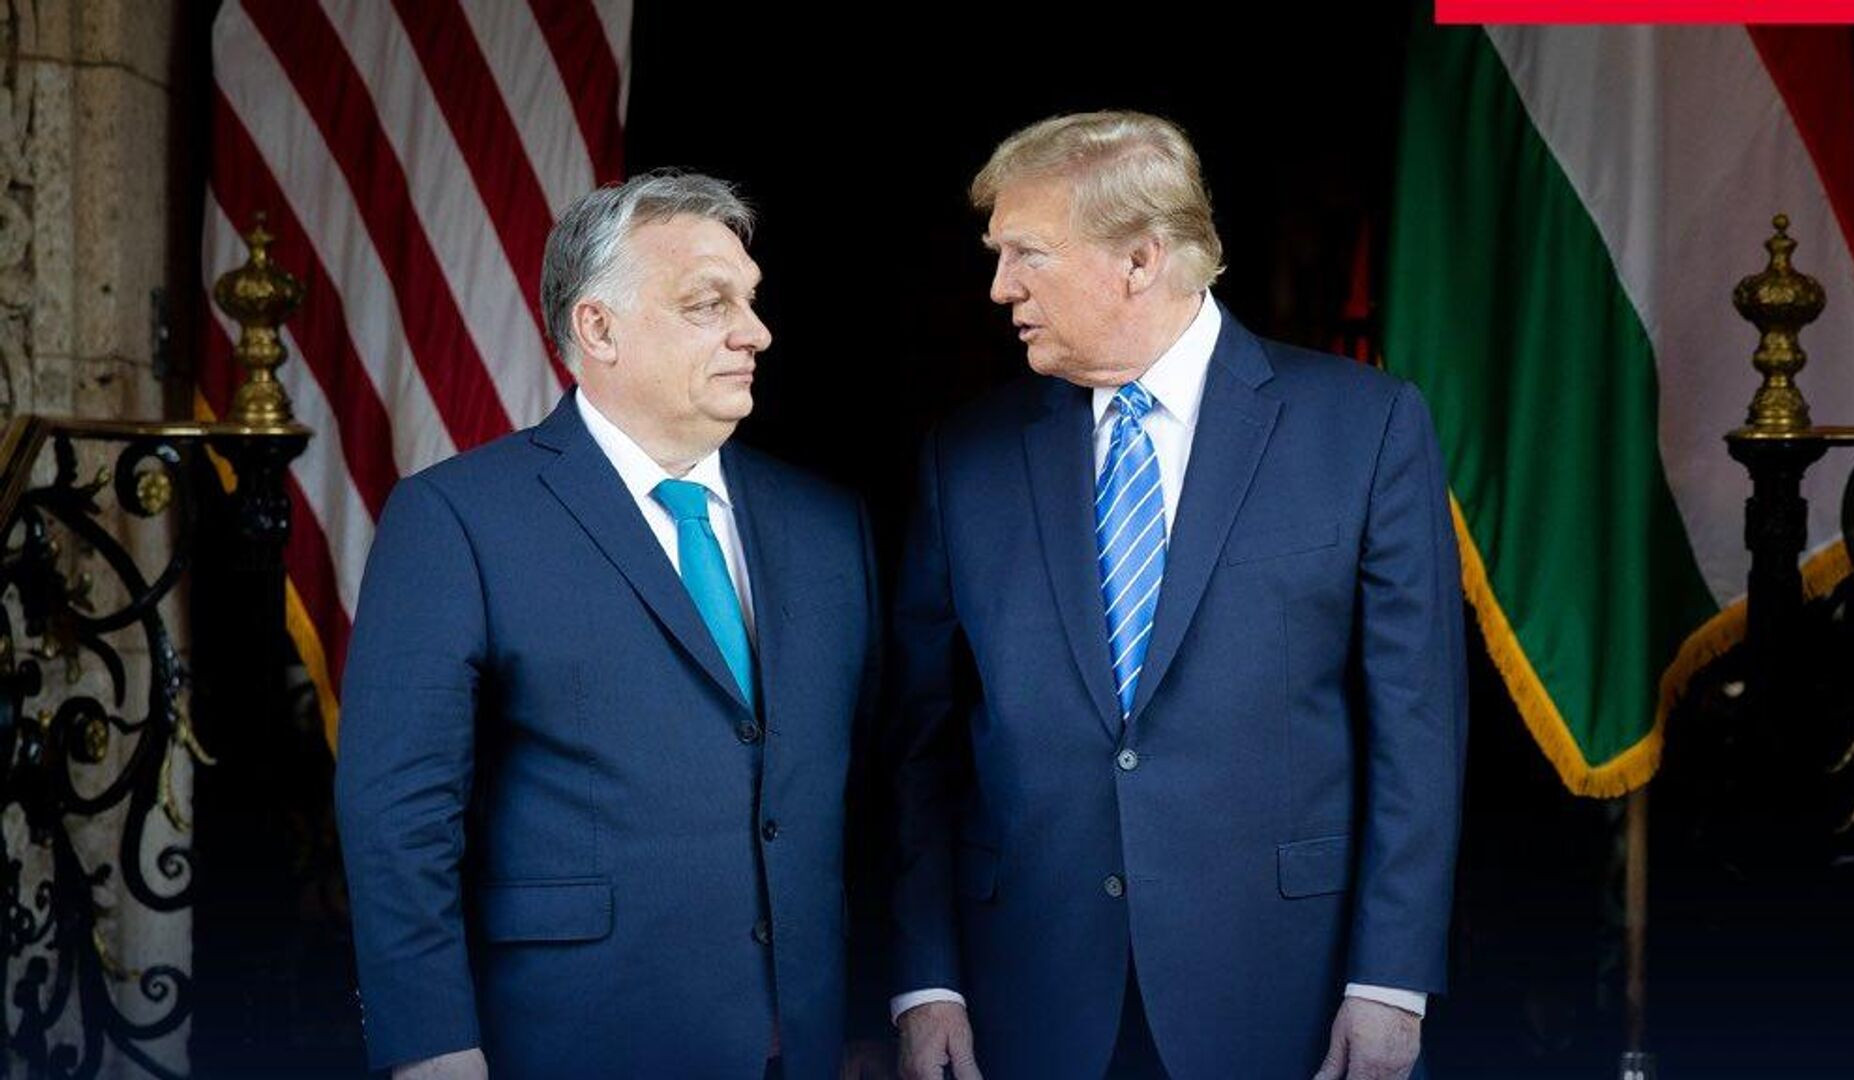 If Trump returns to White House, conflicts in Ukraine and Middle East will be resolved: Orban